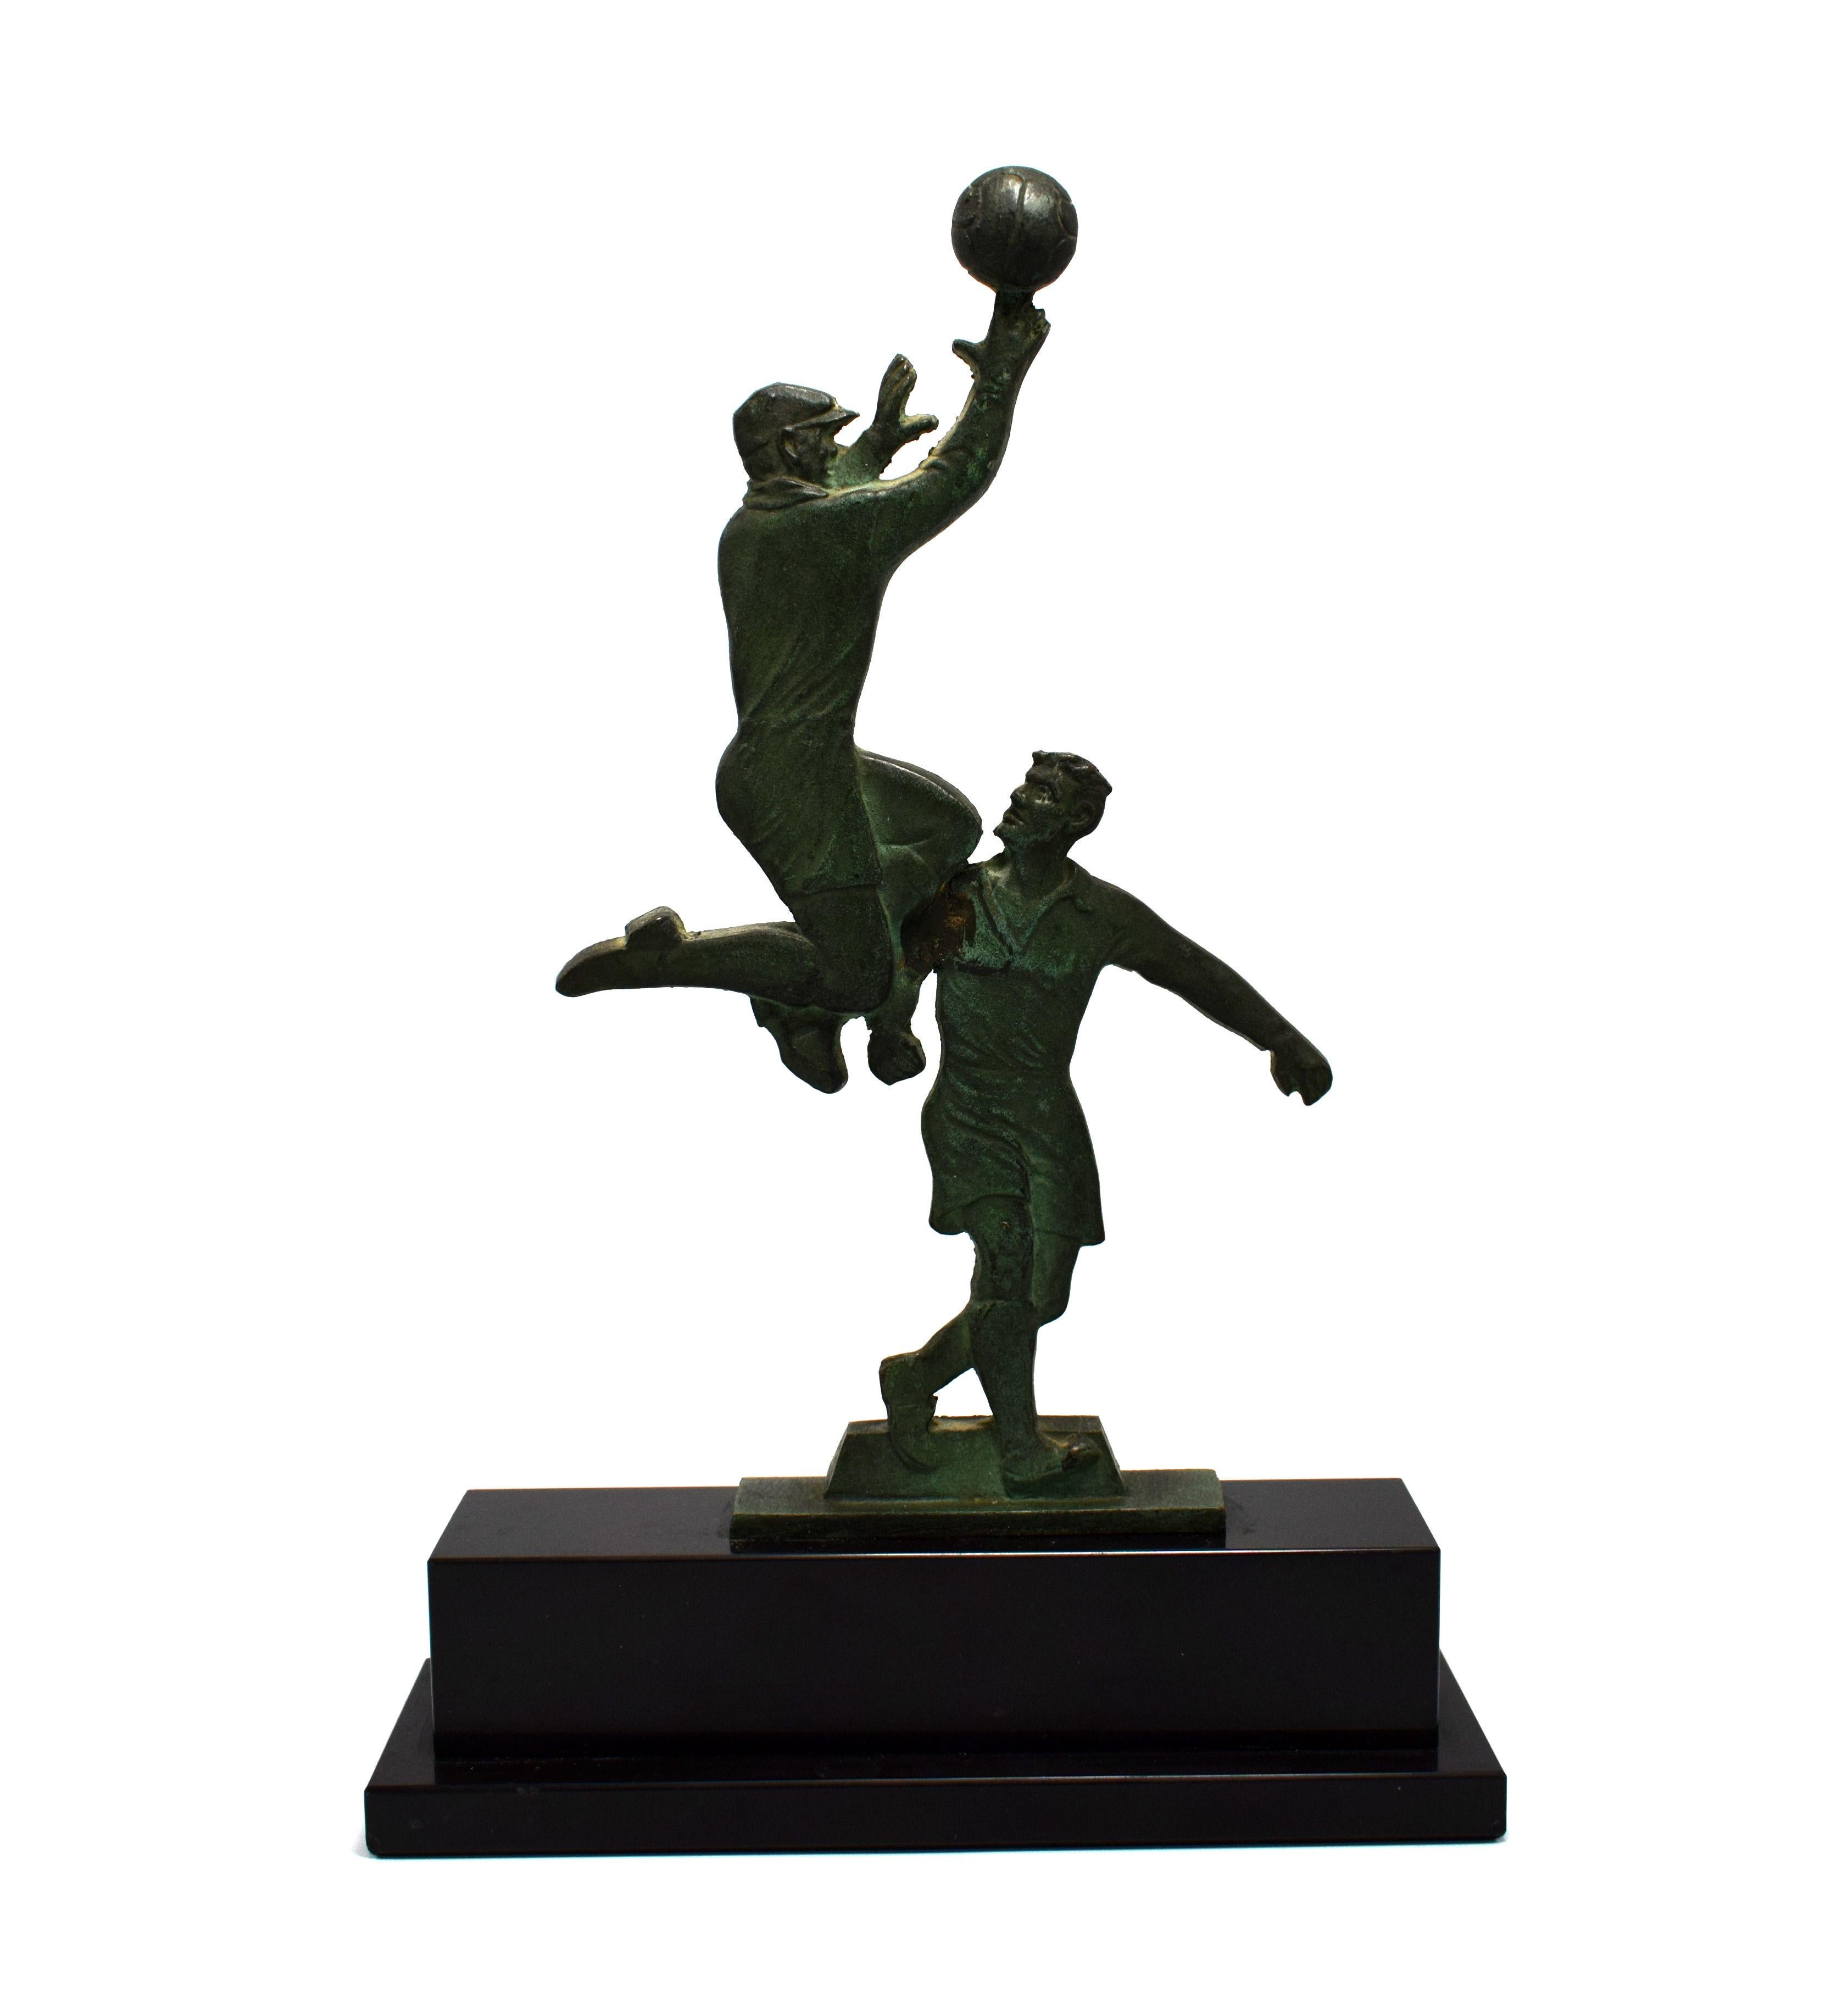 Orinating from France and dated to the 1930s is this fabulous figural group which depicts two footballers of the time mid play. You don't have to be a fan of sport or football for that matter to appreciate this piece. Historically very interesting,